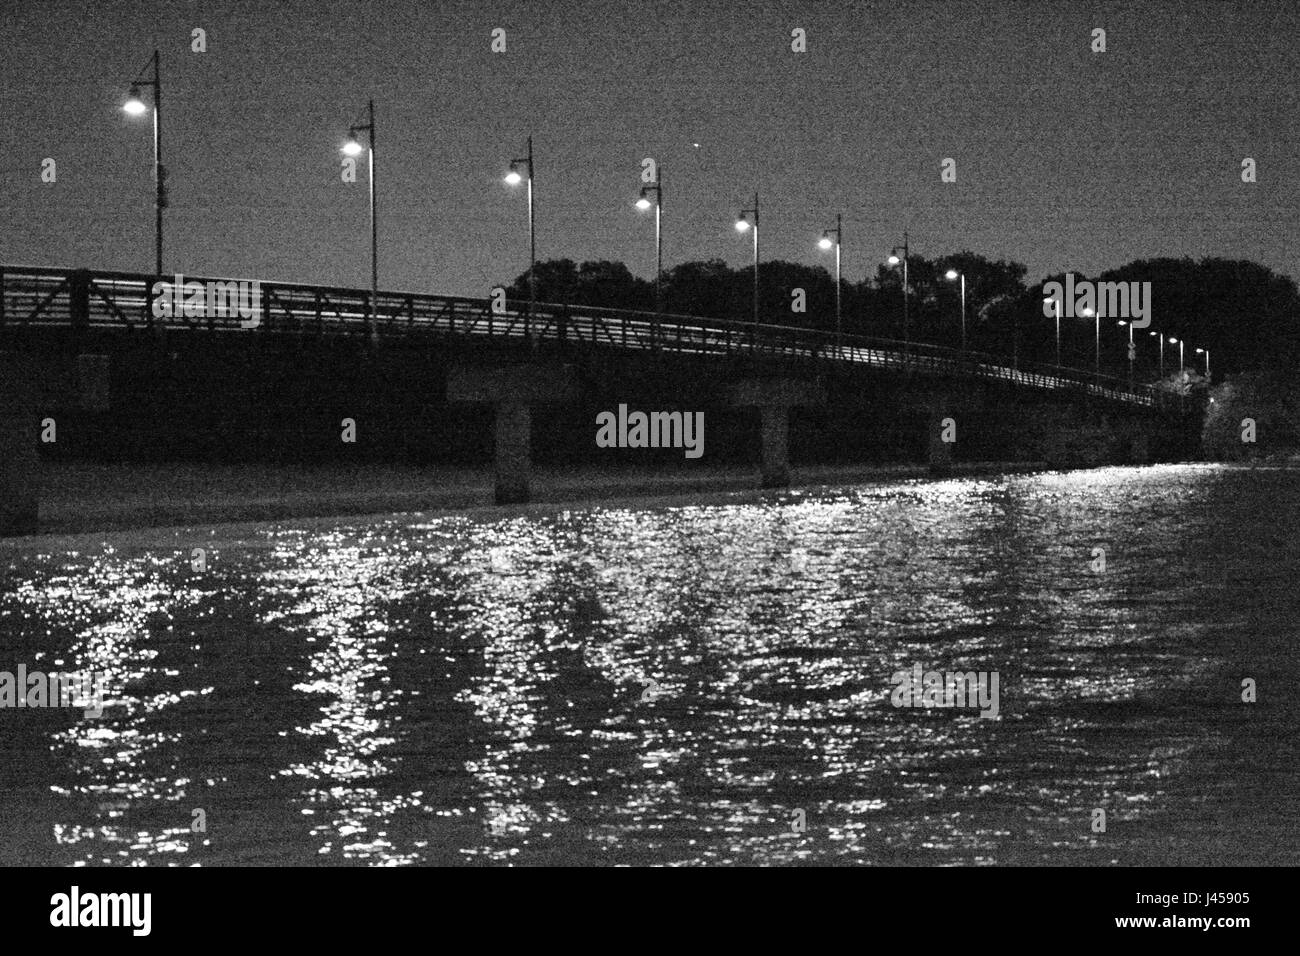 Grainy black and white photo of lights illuminating the Mockingbird footbridge at night at the northern end of White Rock Lake in Dallas, Texas Stock Photo